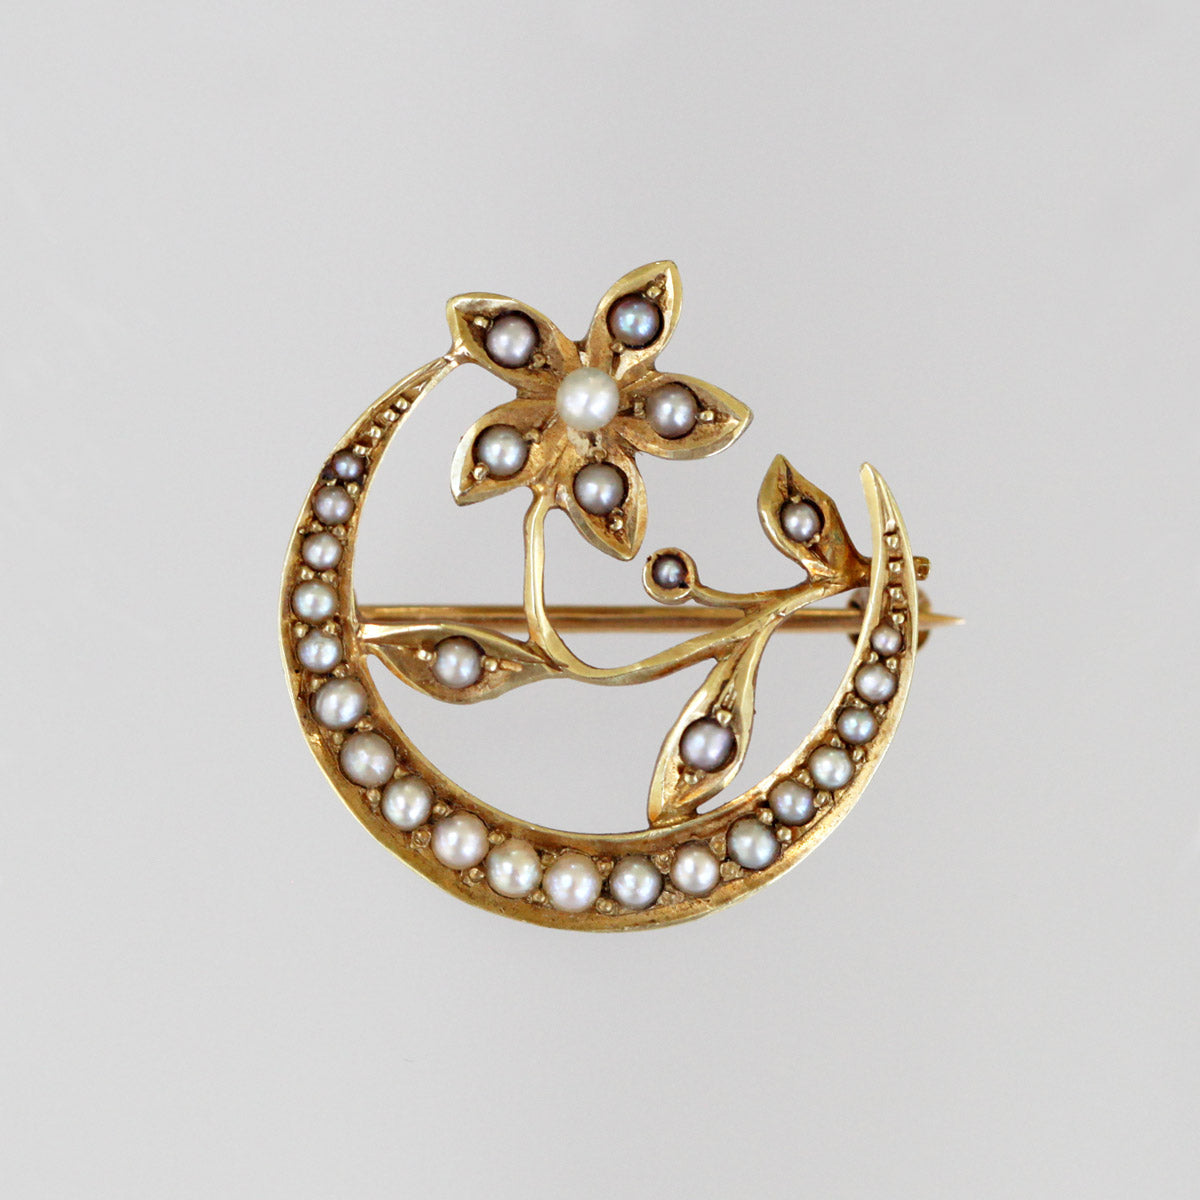 Antique Victorian 14K Gold Seed Pearl Flower & Crescent Pin Brooch